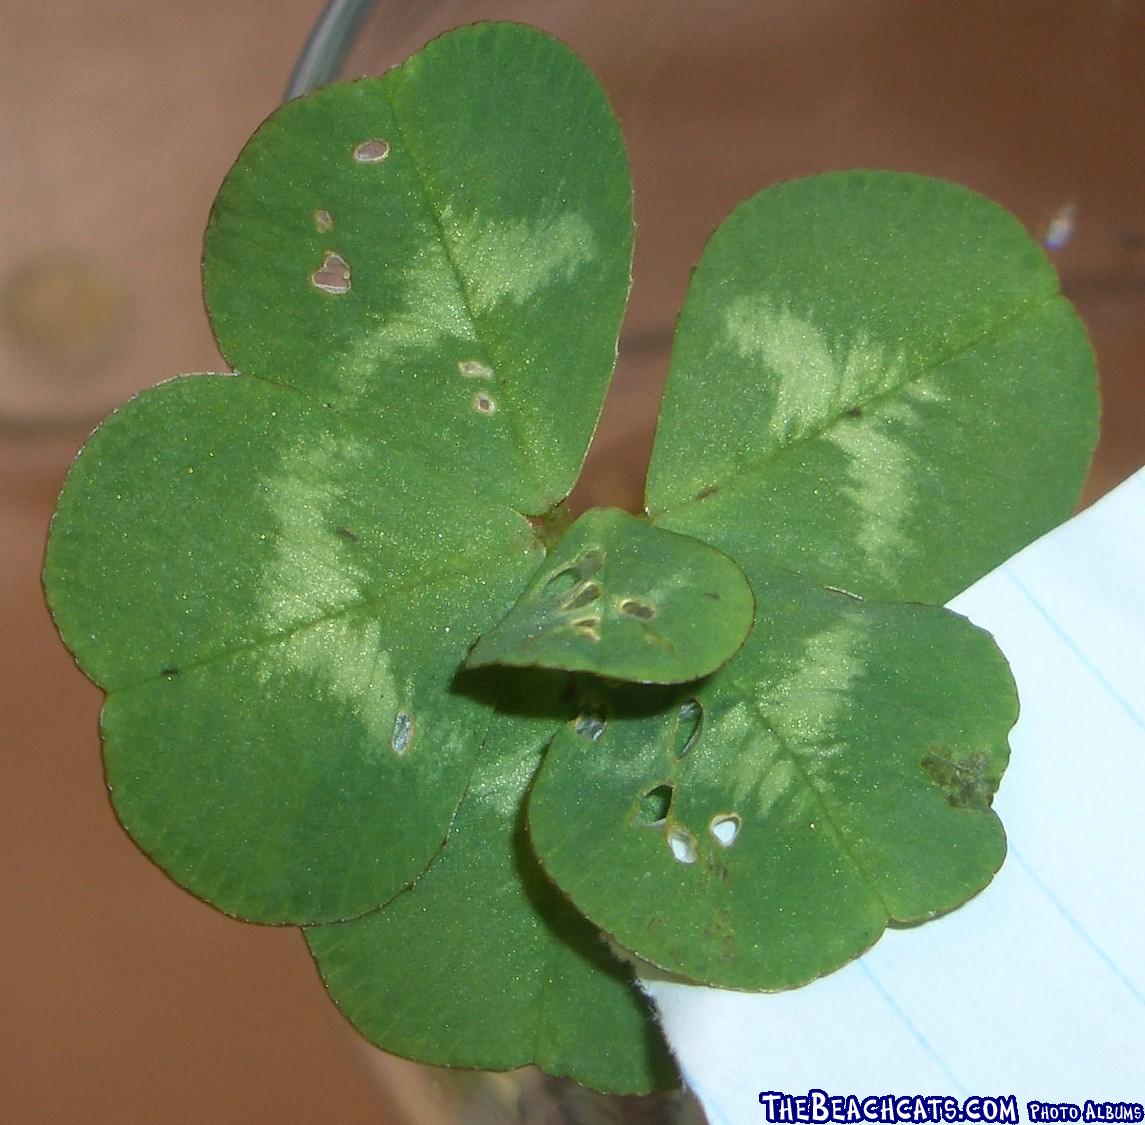 6 leaf clover for extra luck!